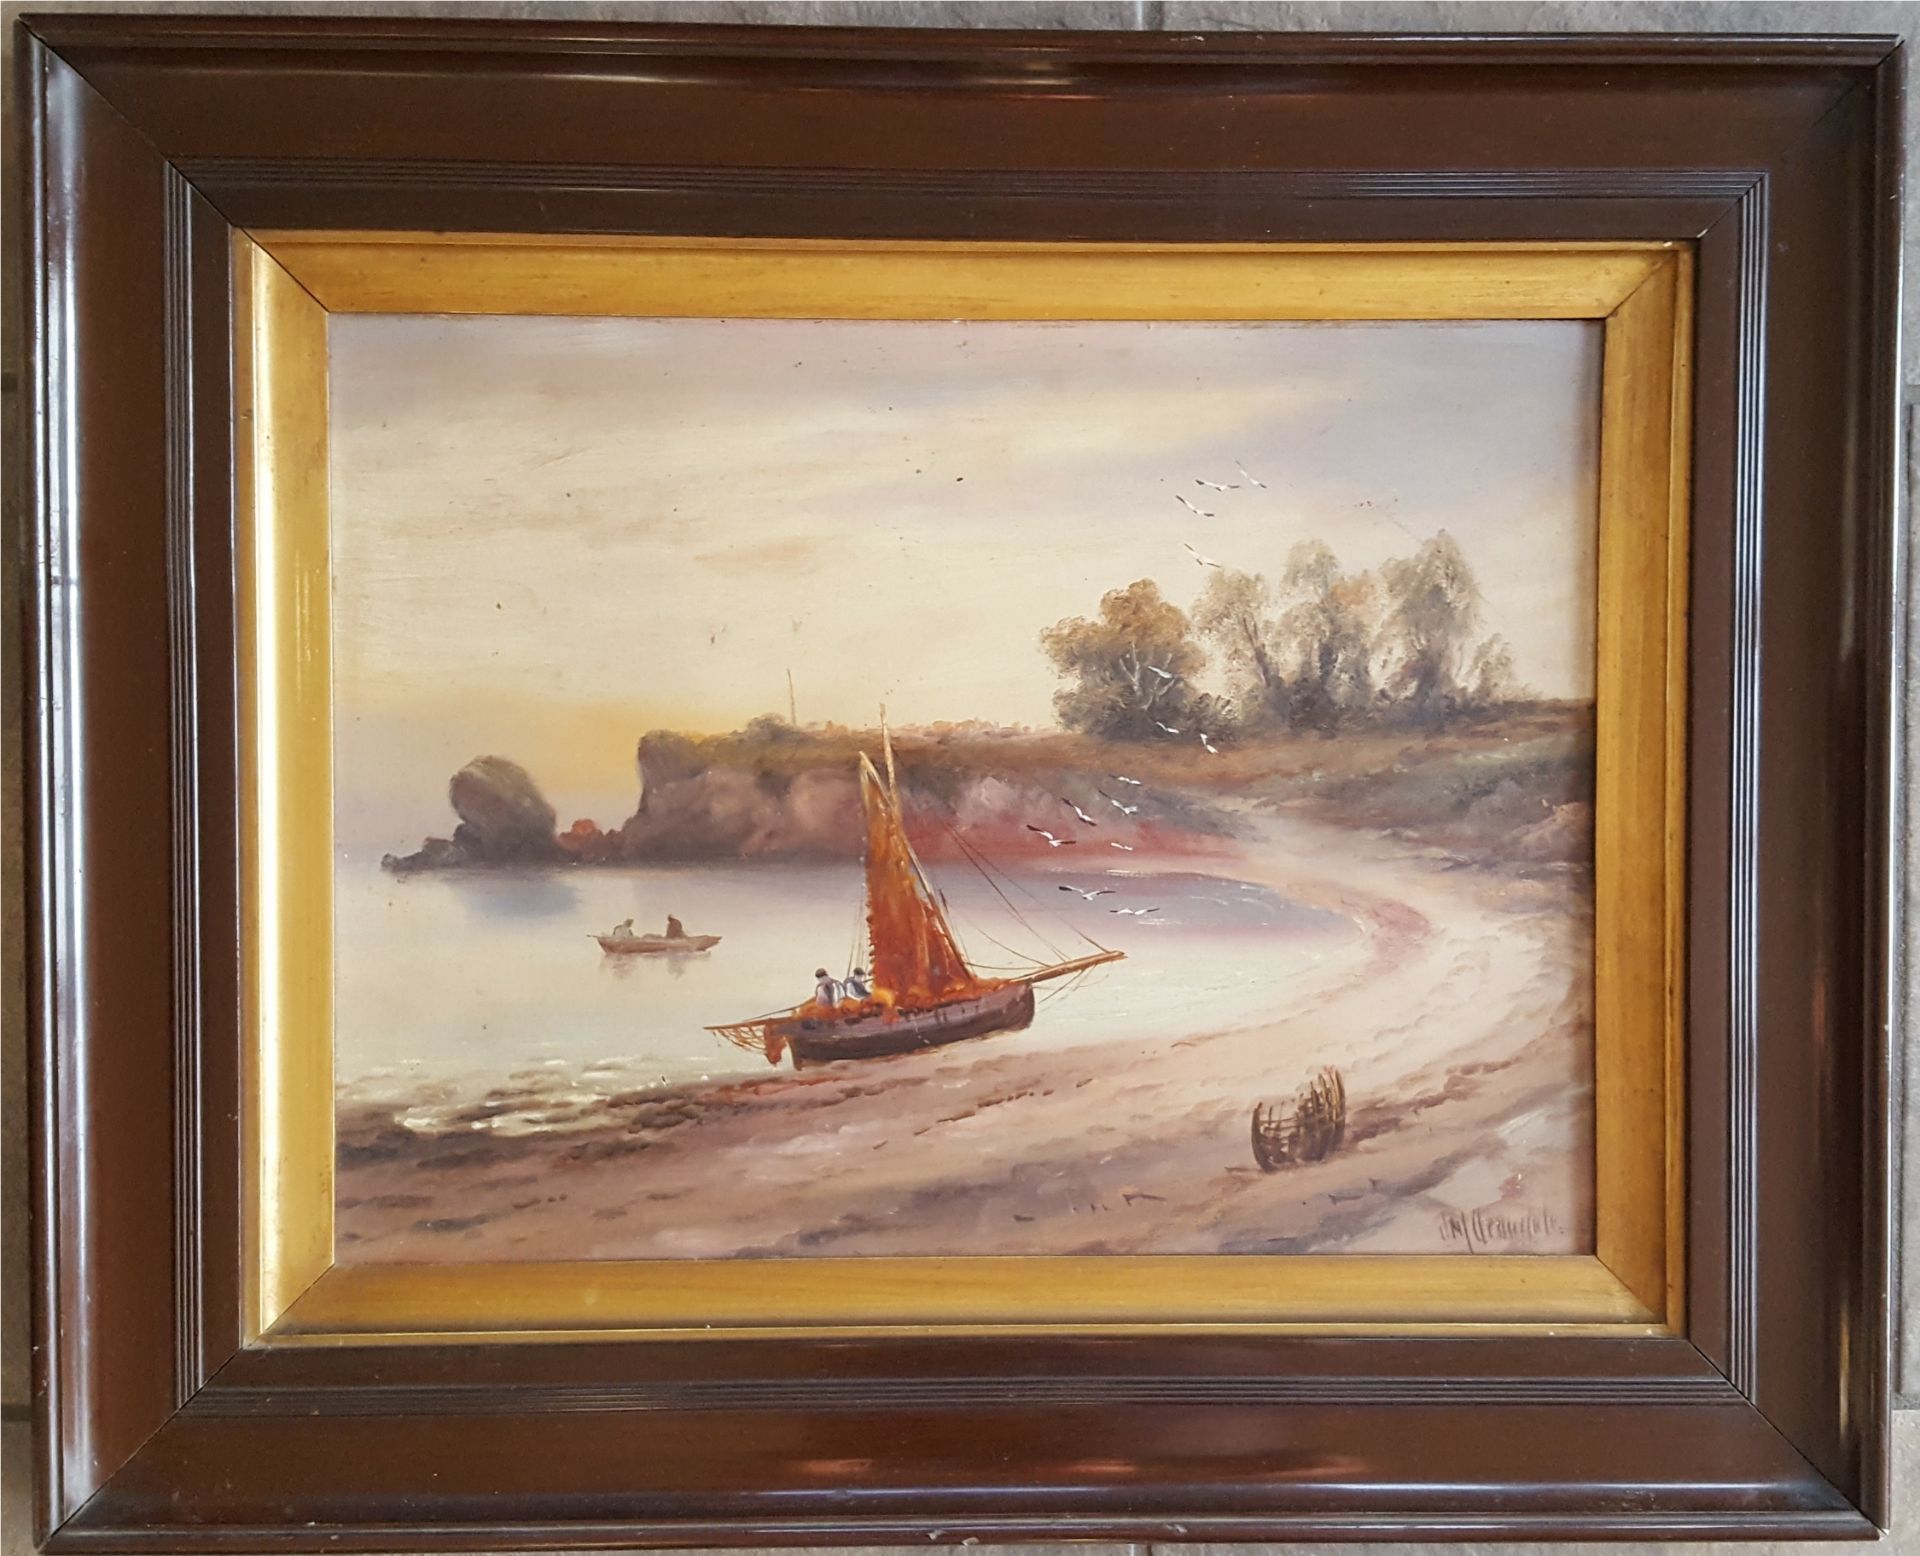 Antique Art Oil on Board Painting Nautical Theme Signed Lower Right